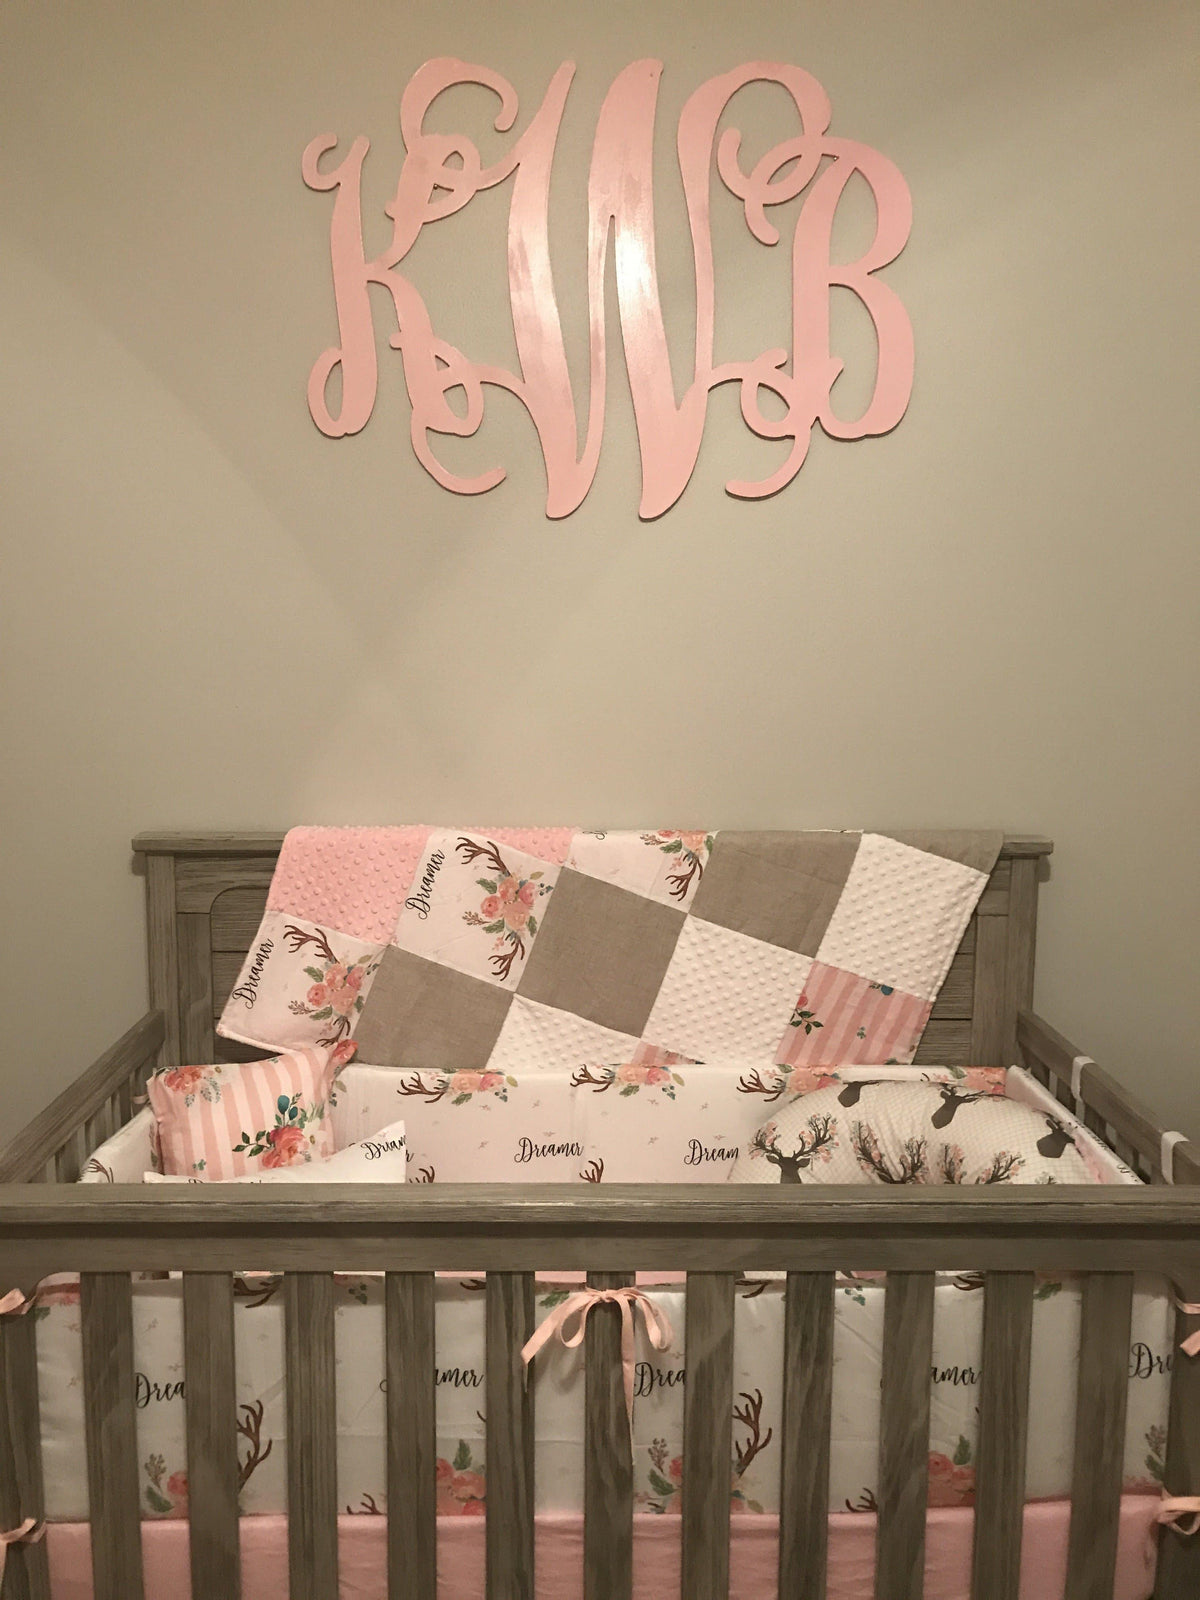 Custom Girl Crib Bedding - Dreamer Antler and Floral Stripe Woodland Nursery Collection - DBC Baby Bedding Co 